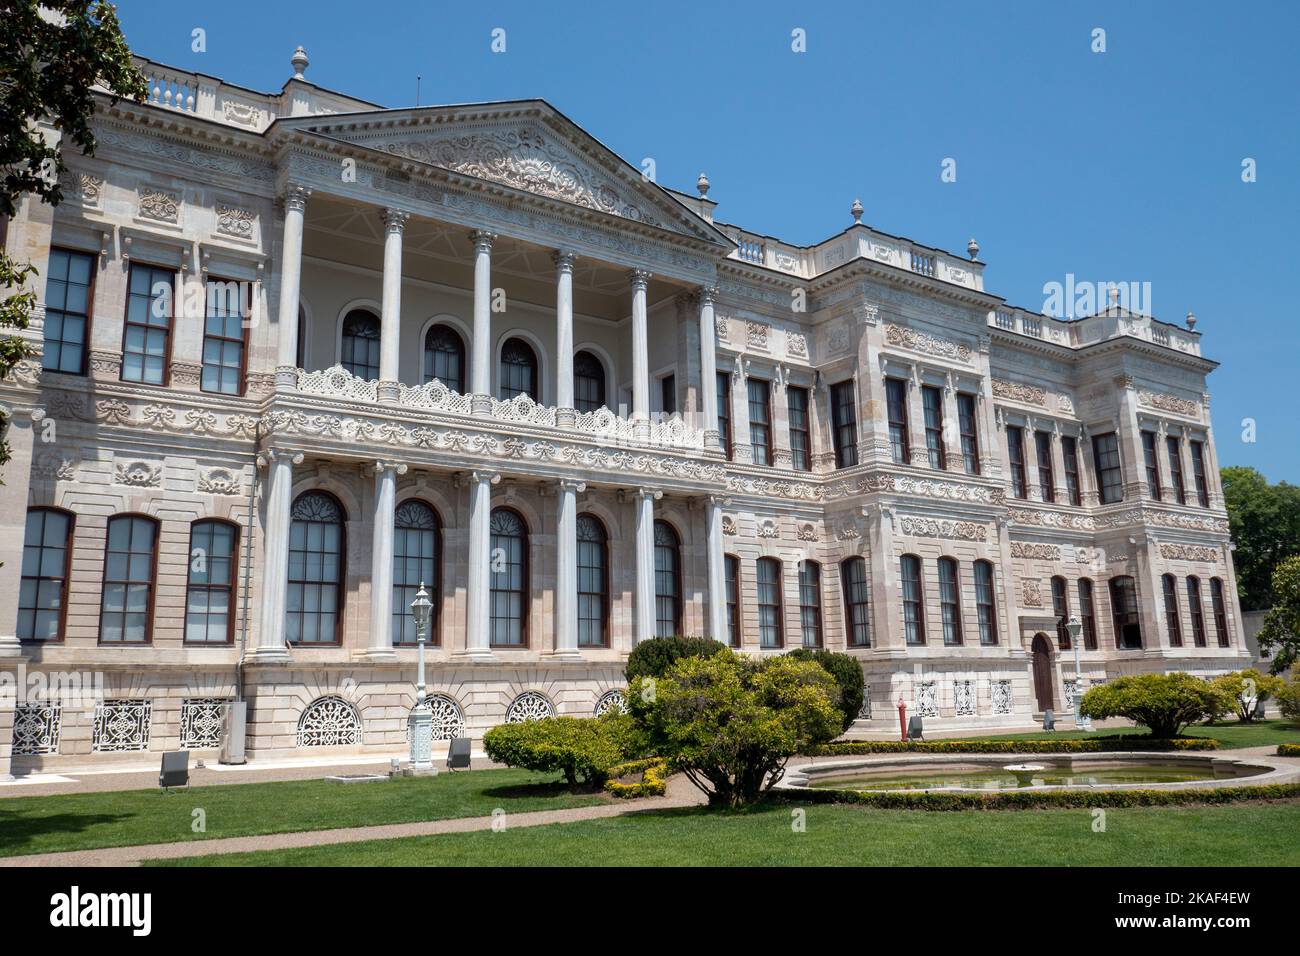 ISTANBUL, TURKEY - May 25, 2022: It is the National Museum of Palace Painting in the Dolmabahce Palace Complex. This section hosts paintings of Istanb Stock Photo